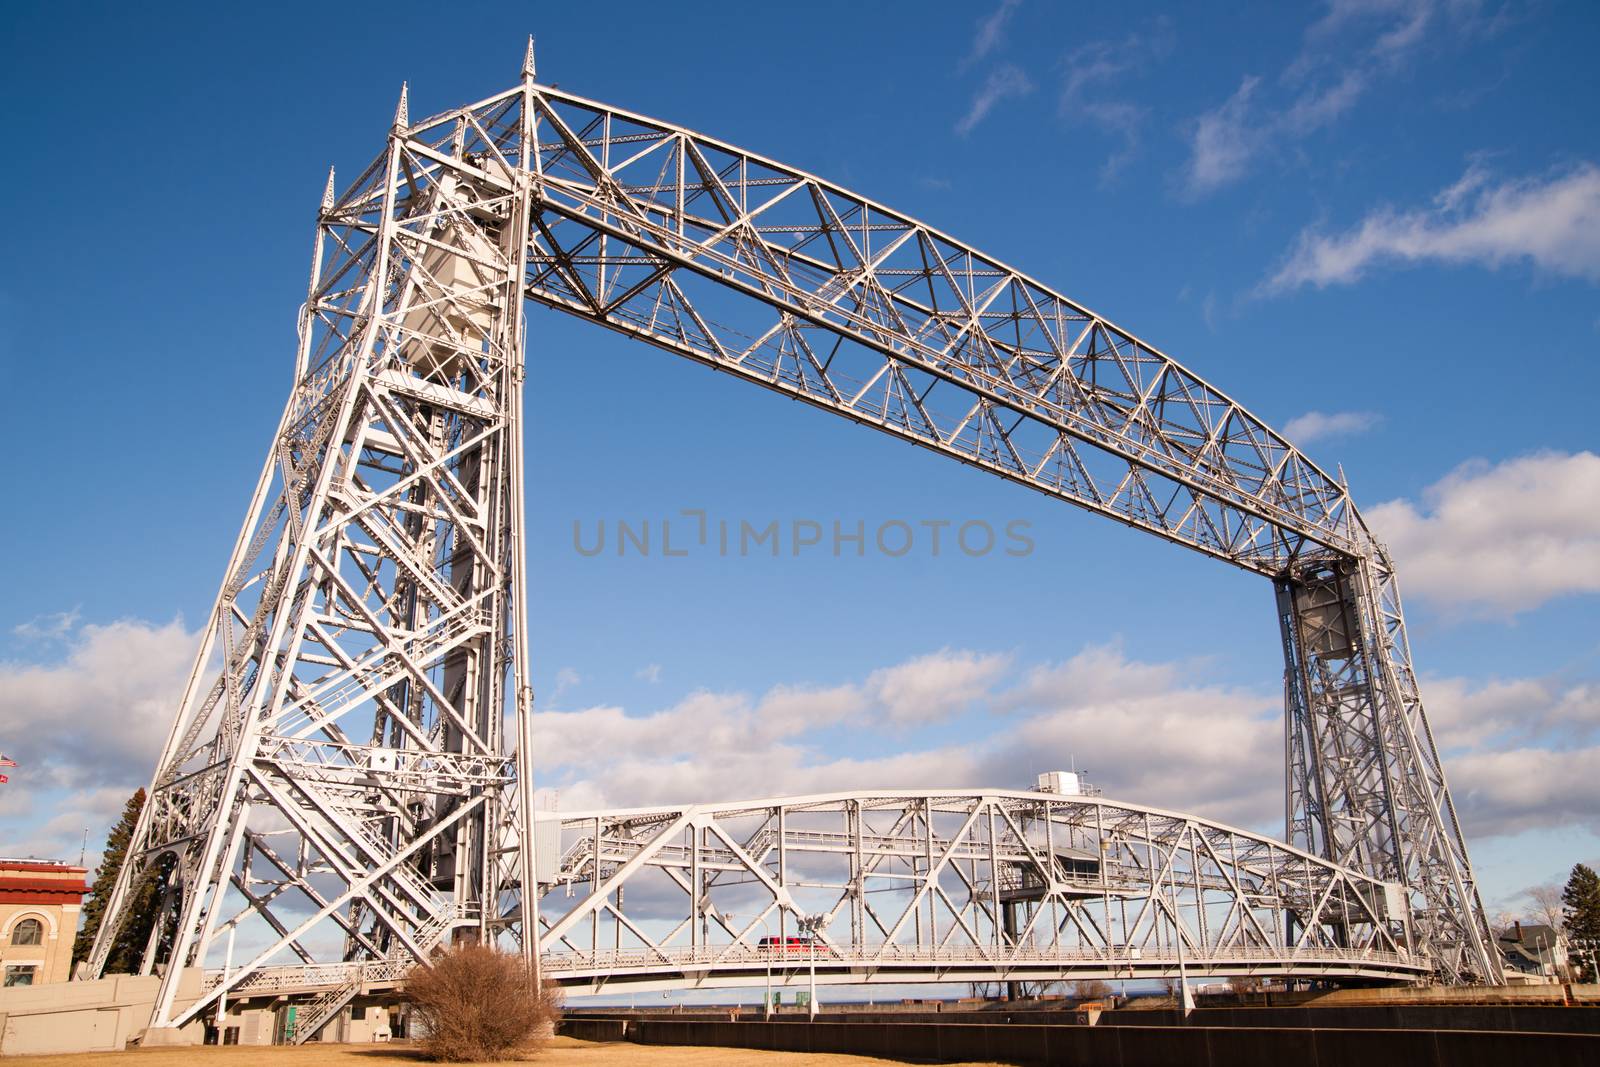 Aerial Lift Bridge Duluth Harbor Lake Superior Minnesota Wiscons by ChrisBoswell